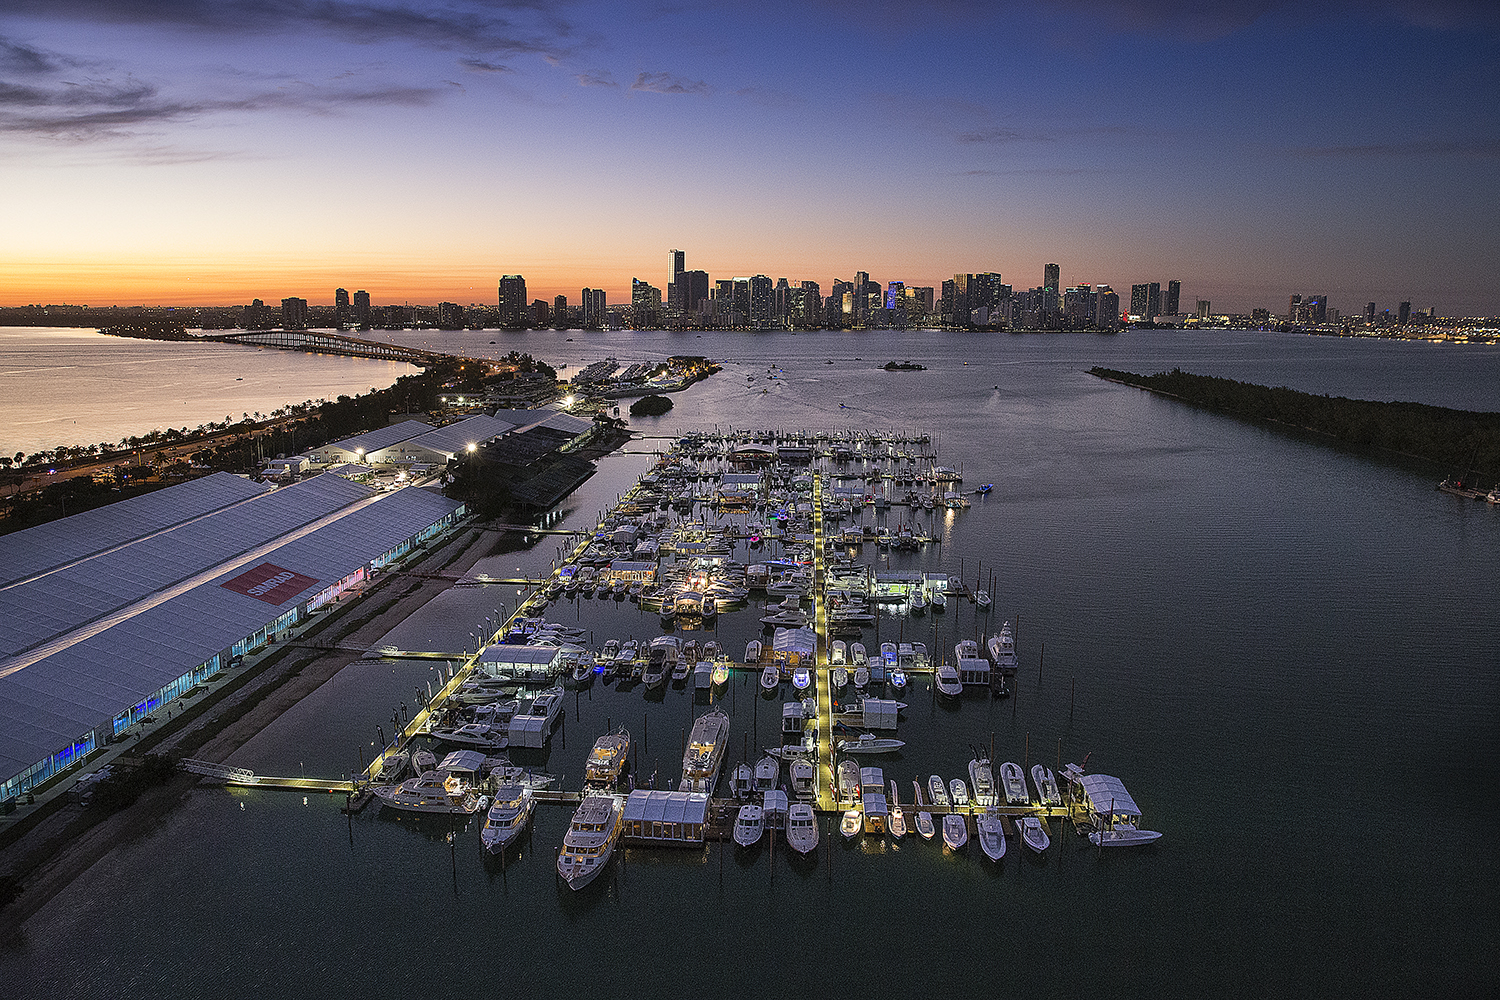 A photo of the 2019 Miami International Boat Show